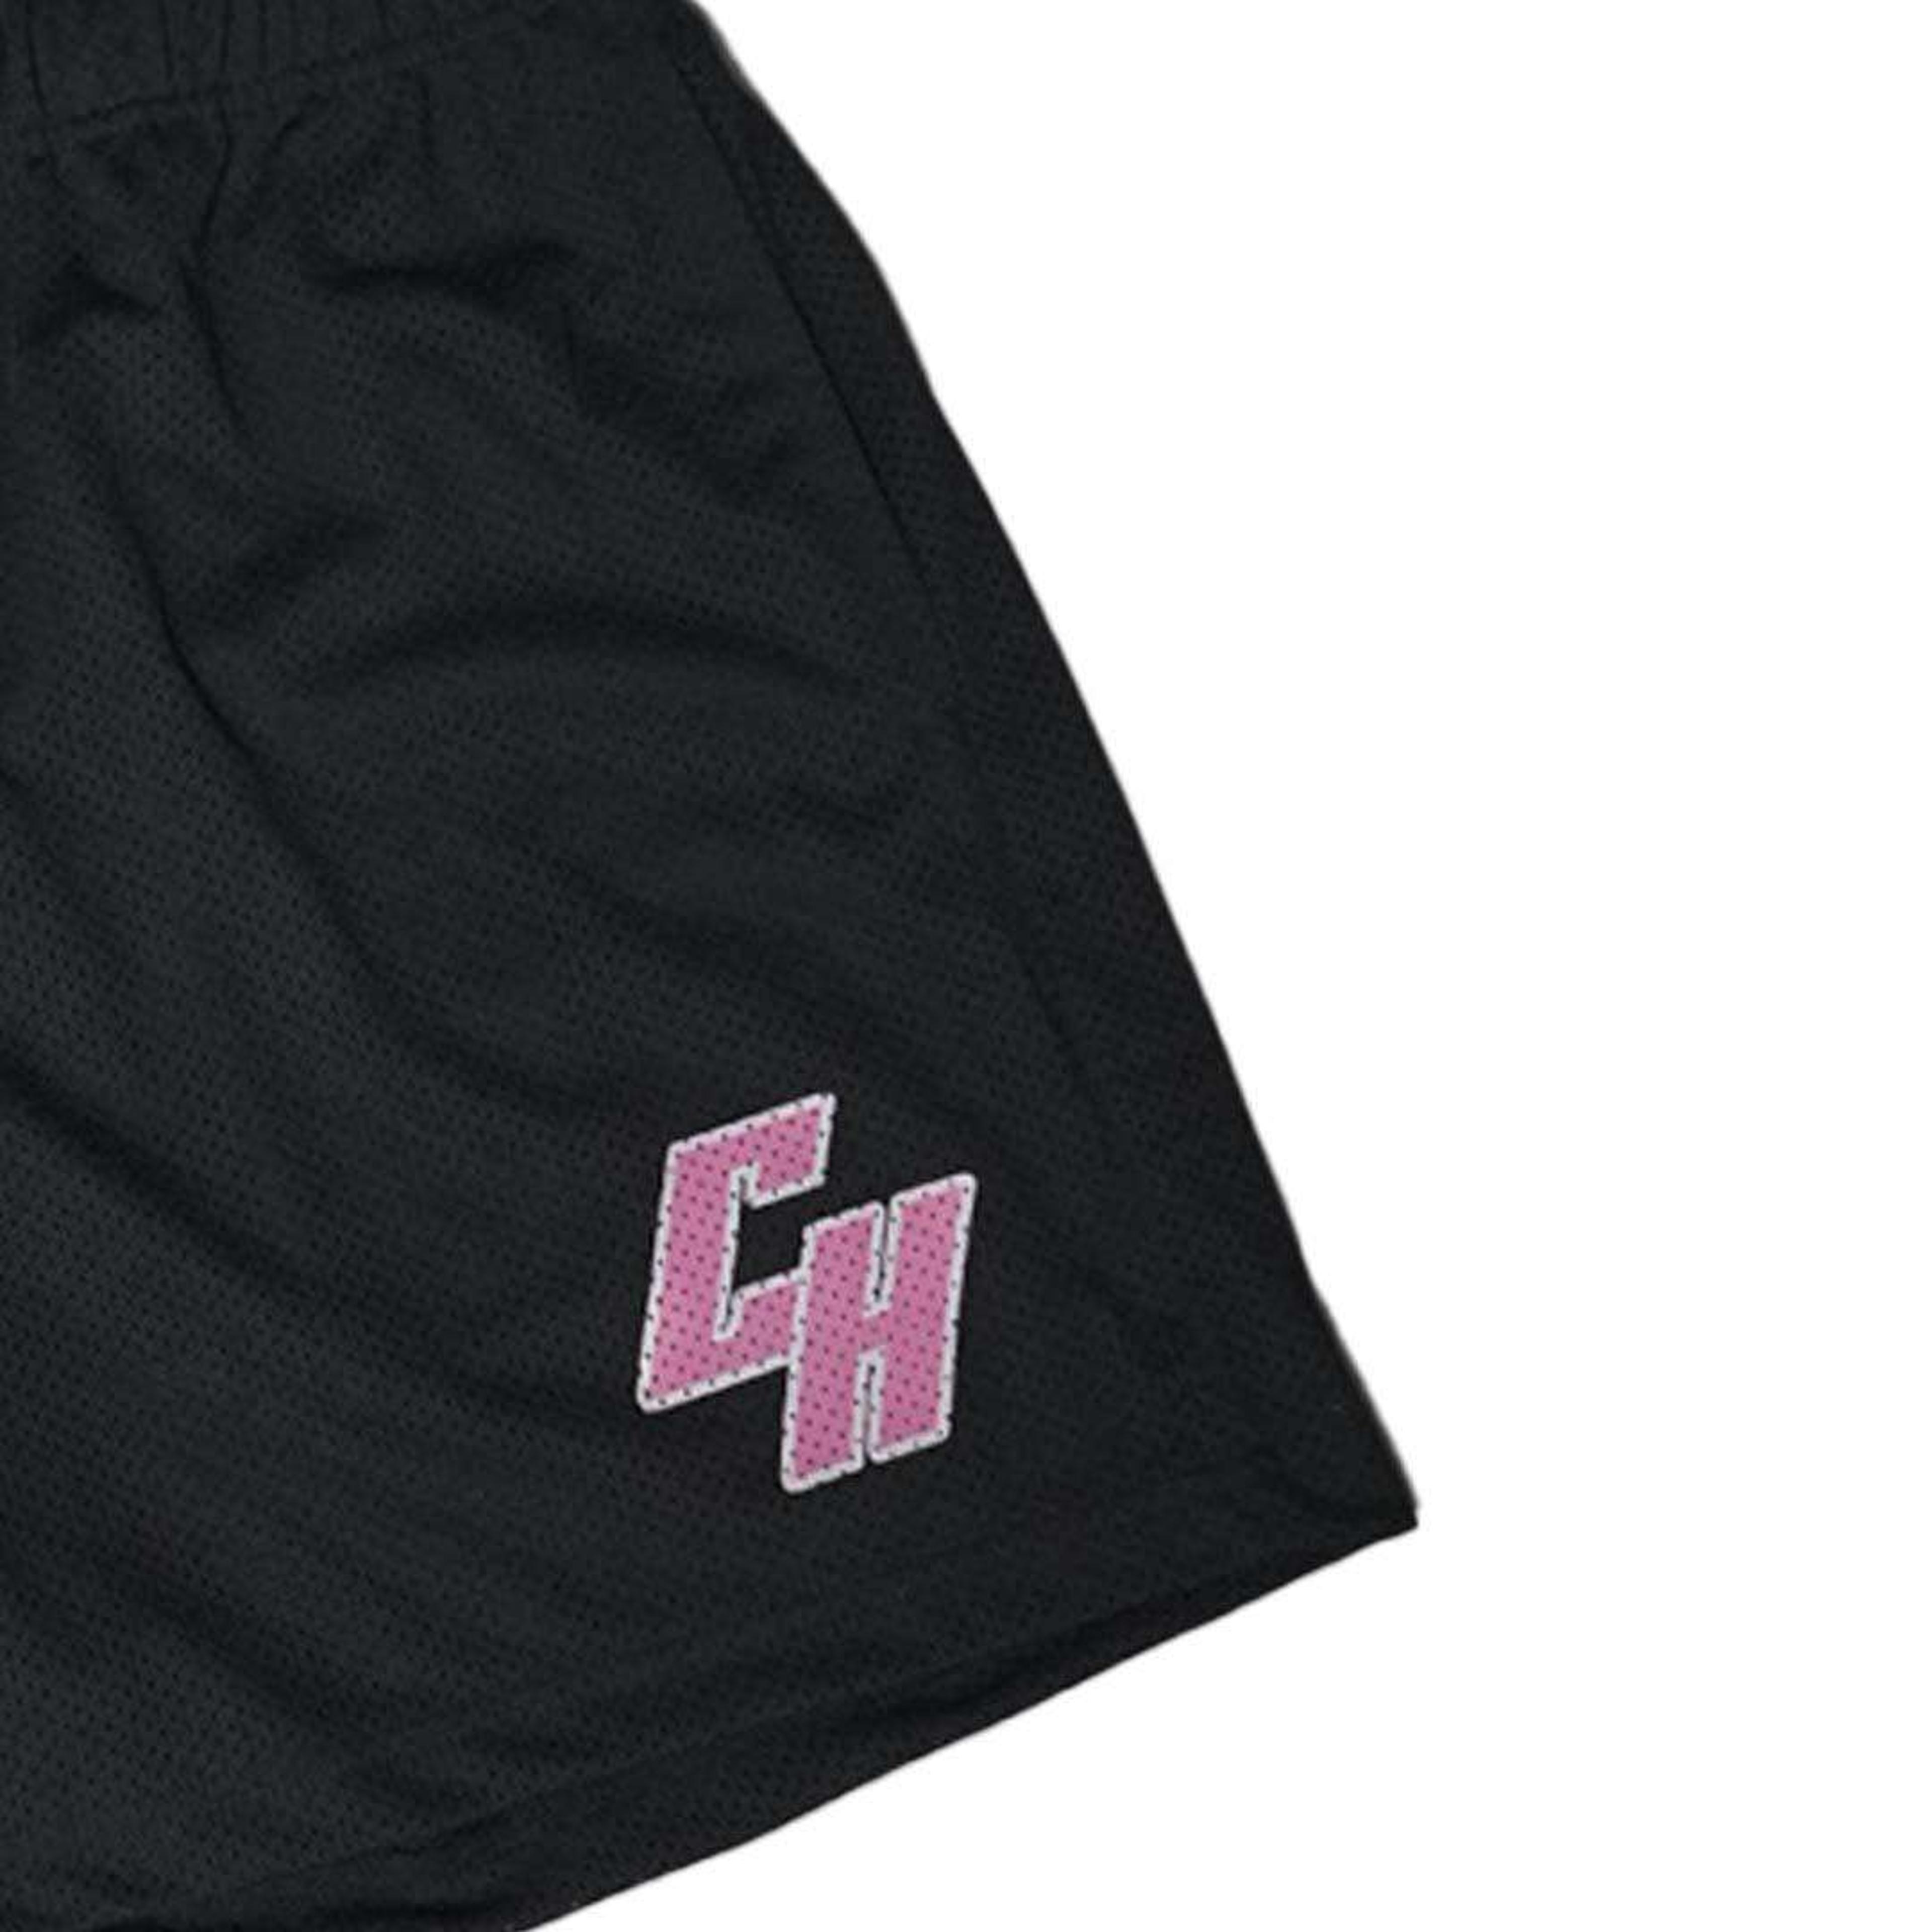 Alternate View 1 of Common Hype Breast Cancer Awareness Short